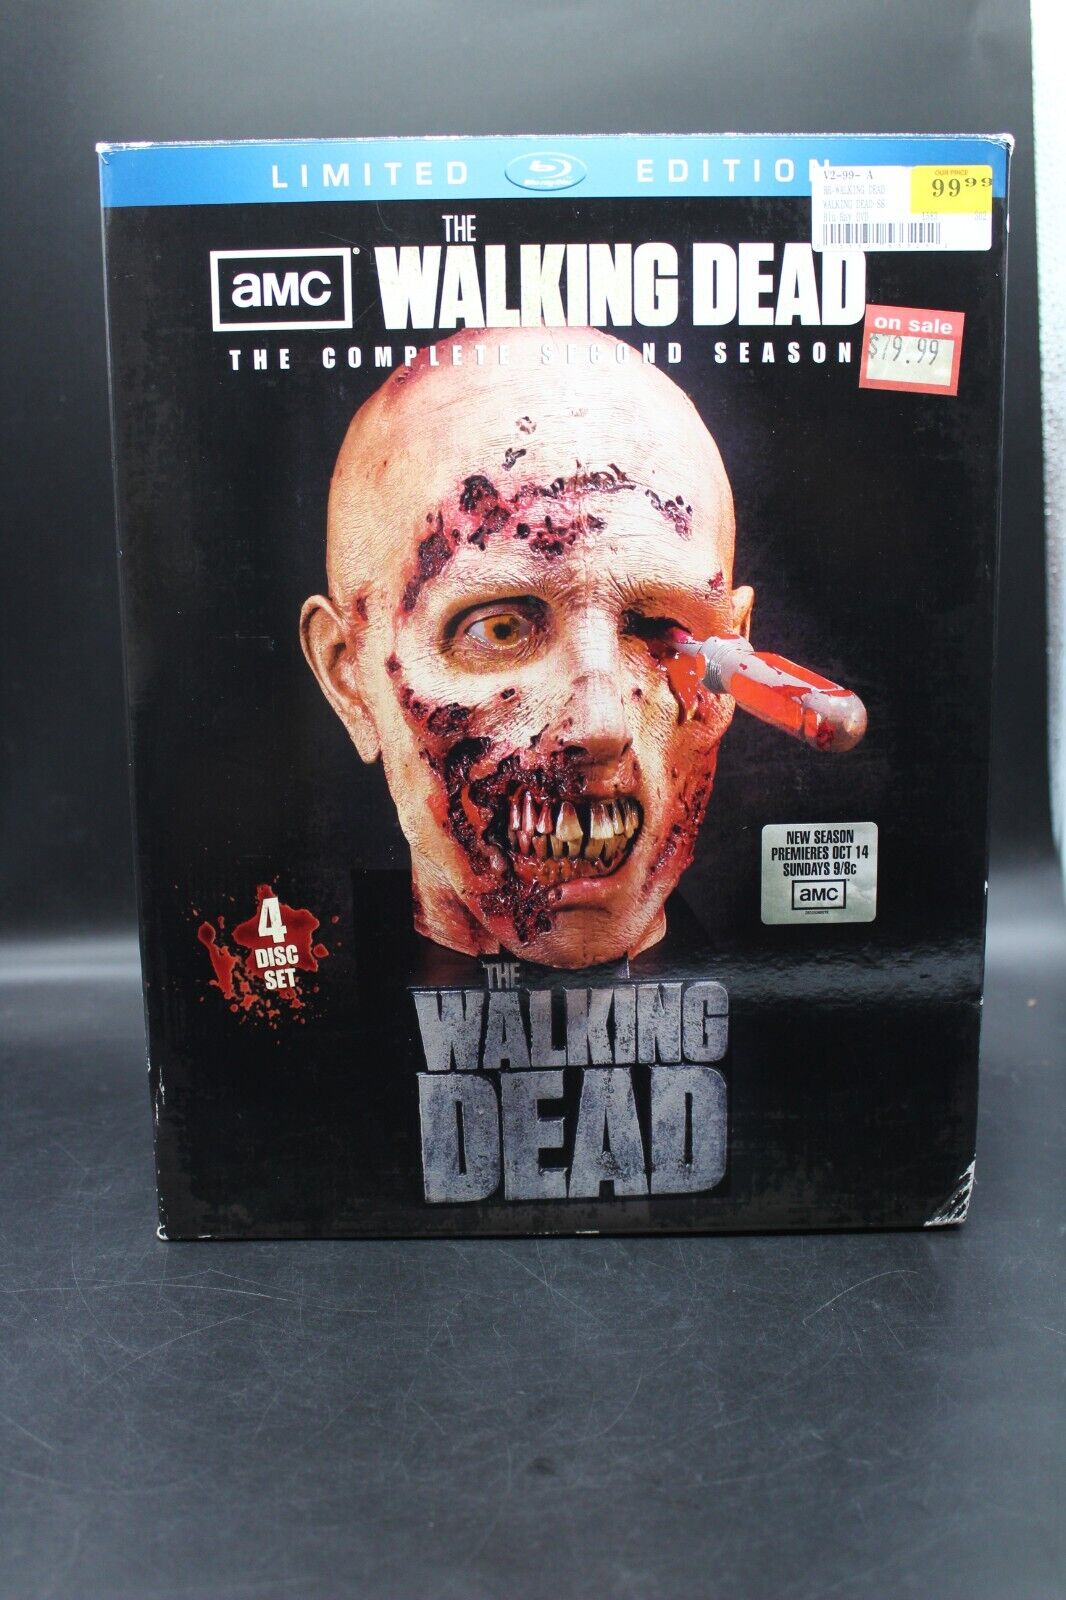 The Walking Dead Season 2 Zombie Head Statue  Blu rays included Comes with Box